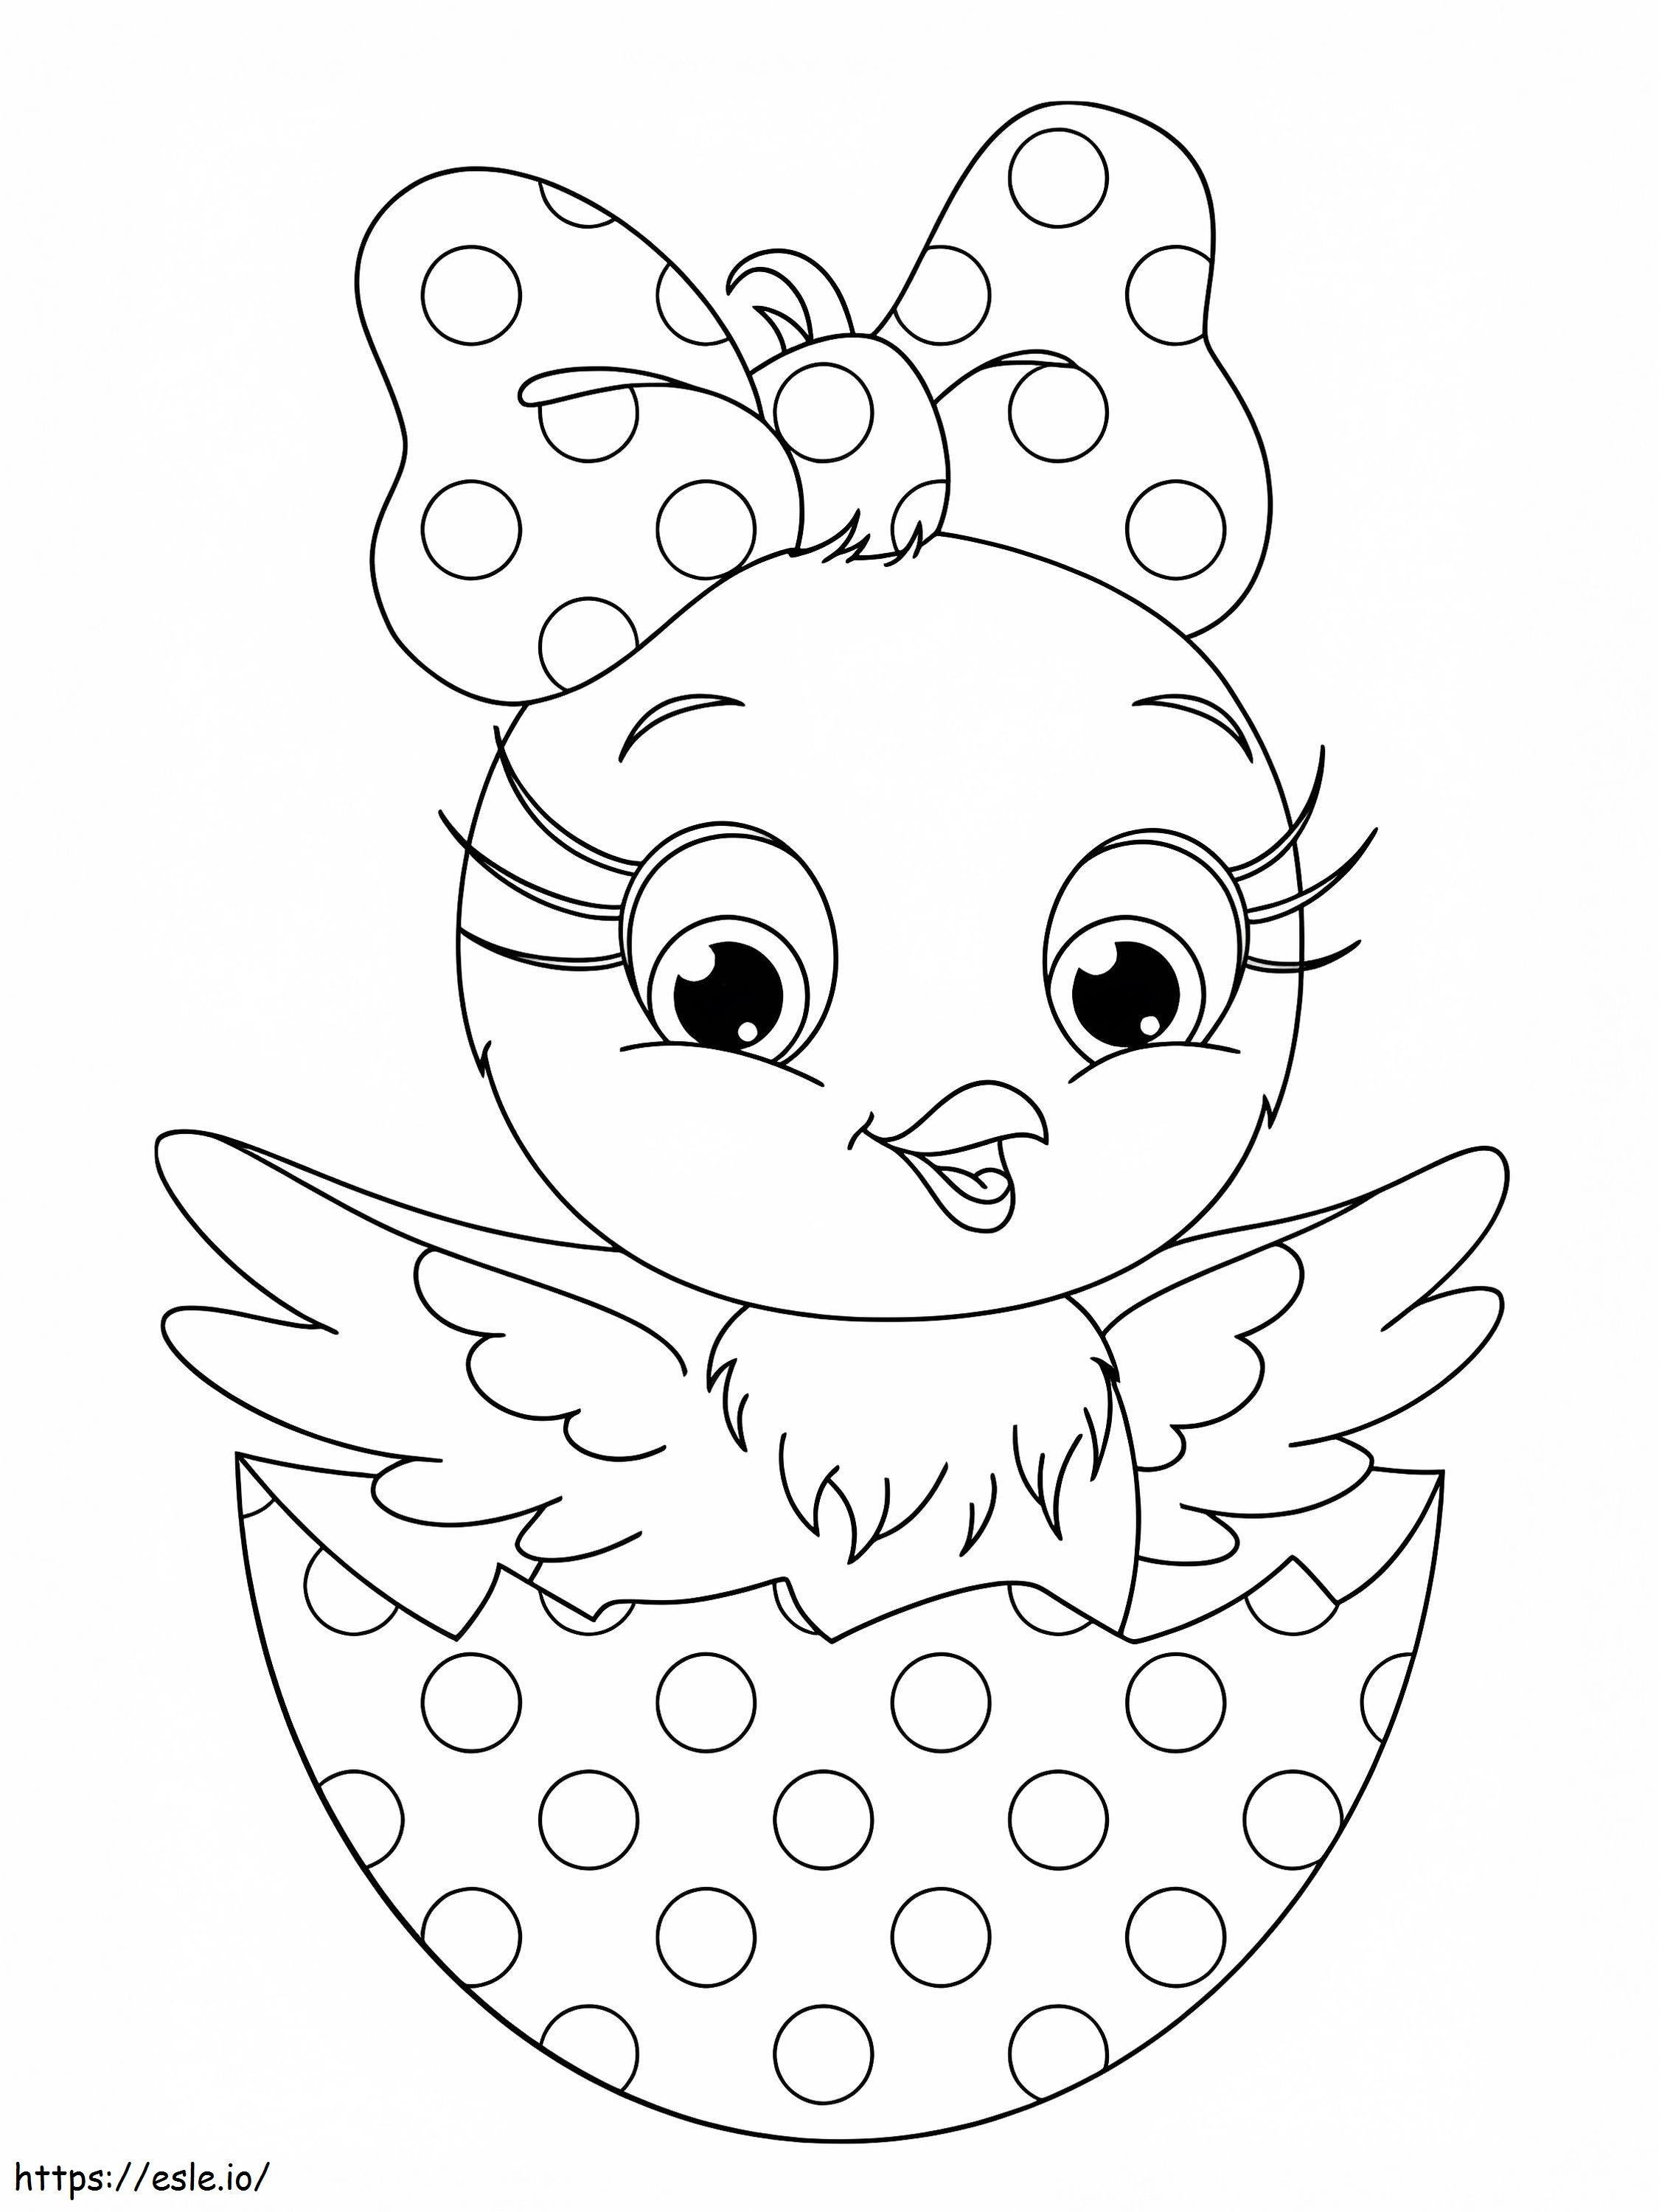 Pretty Easter Chick coloring page